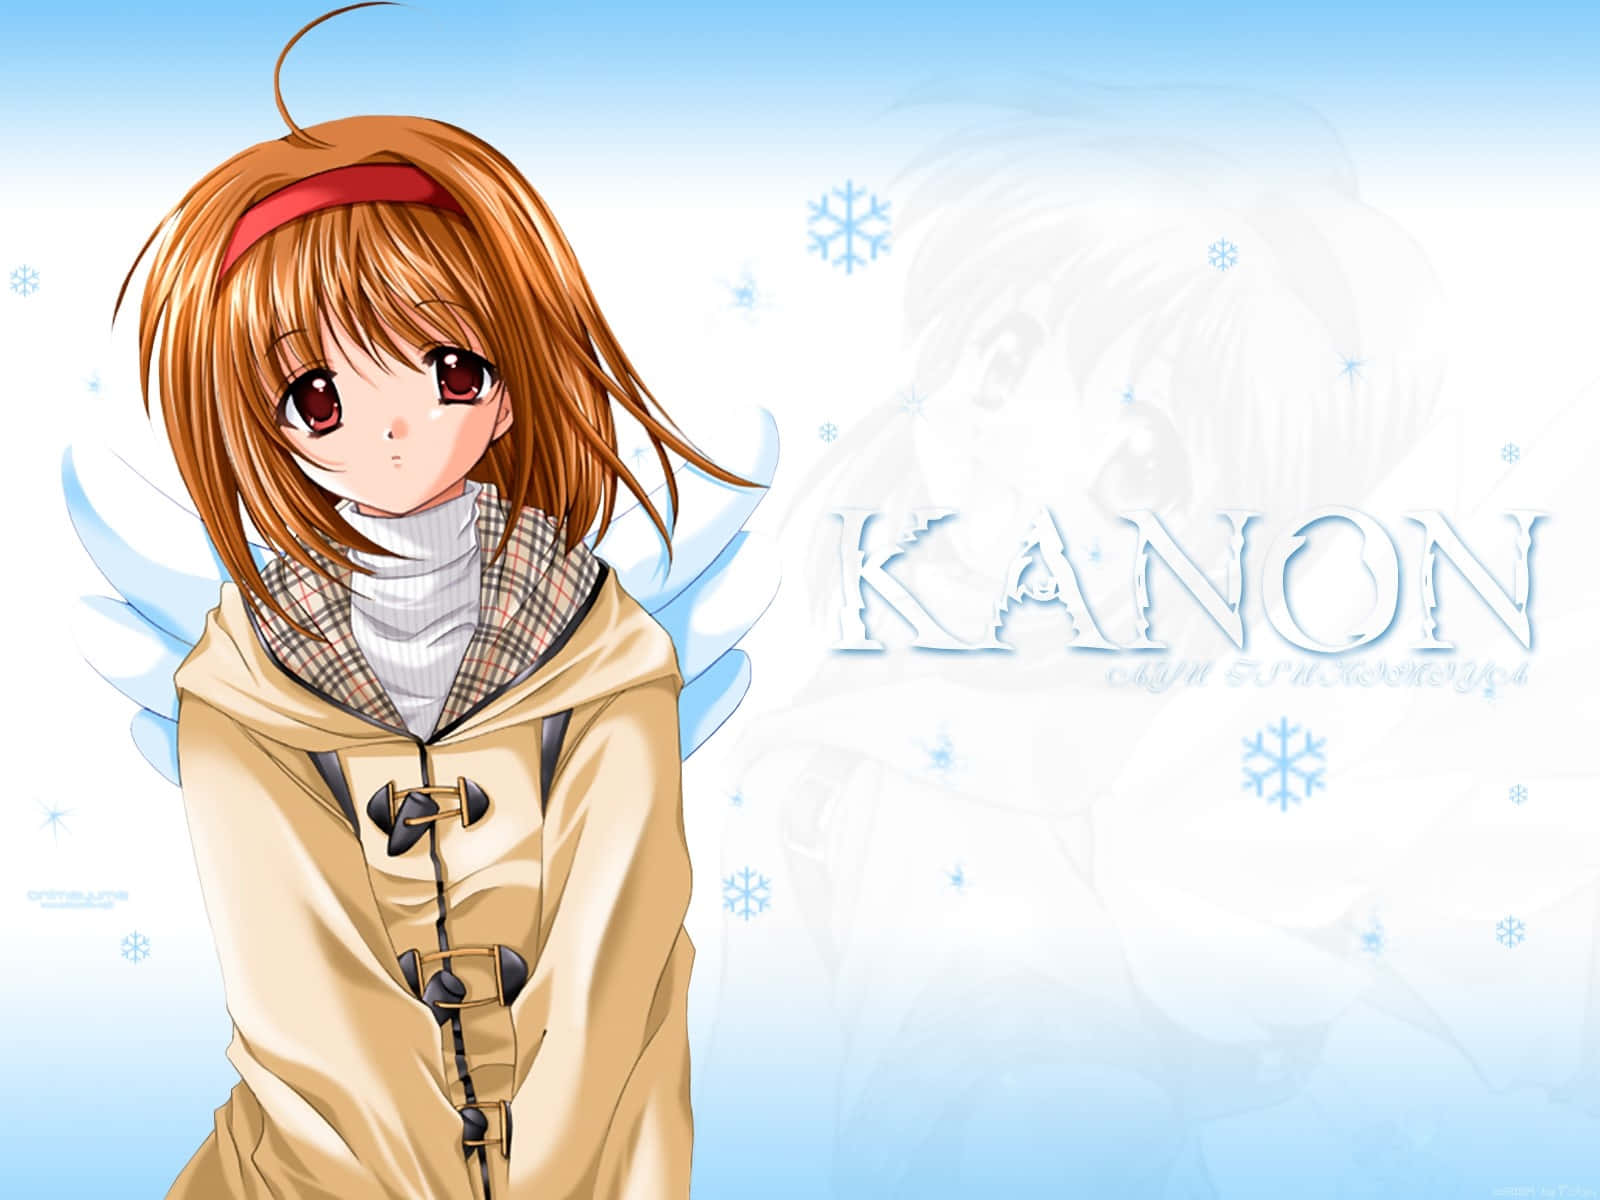 Lose Yourself in Kanon's Beautiful Landscapes Wallpaper